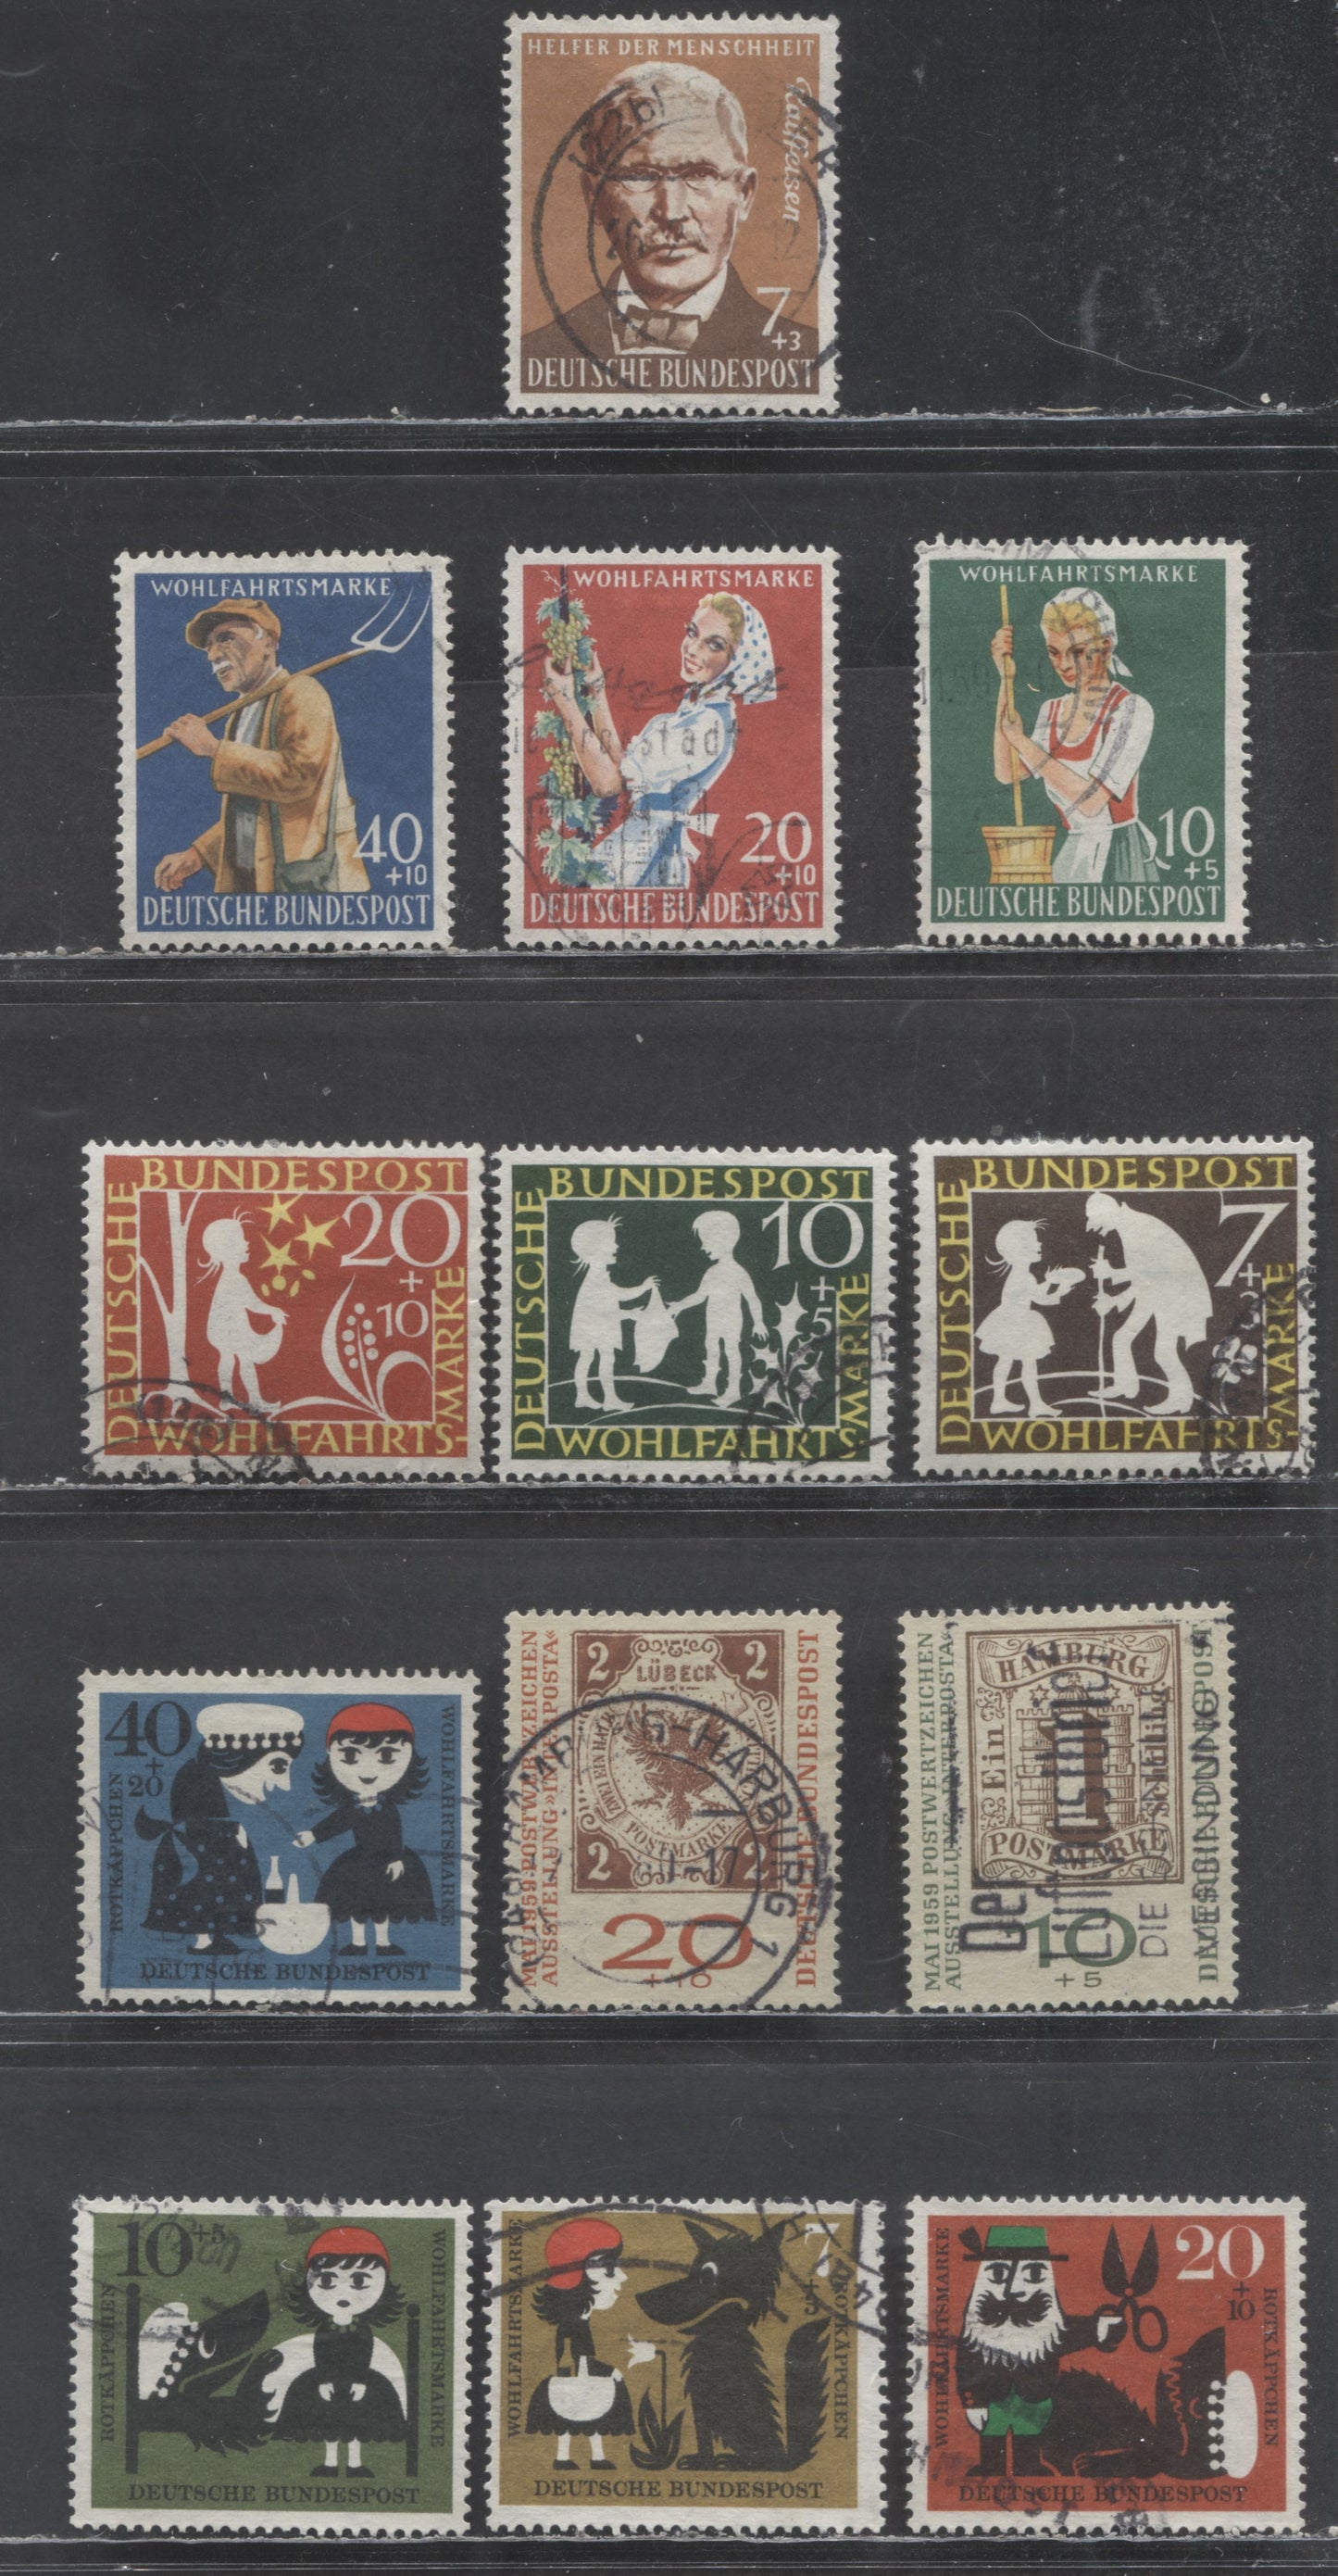 Lot 39 Germany SC#B362/B375 1958-1960 Semi Postals, 13 Fine/Very Fine Used Singles, Click on Listing to See ALL Pictures, Estimated Value $15